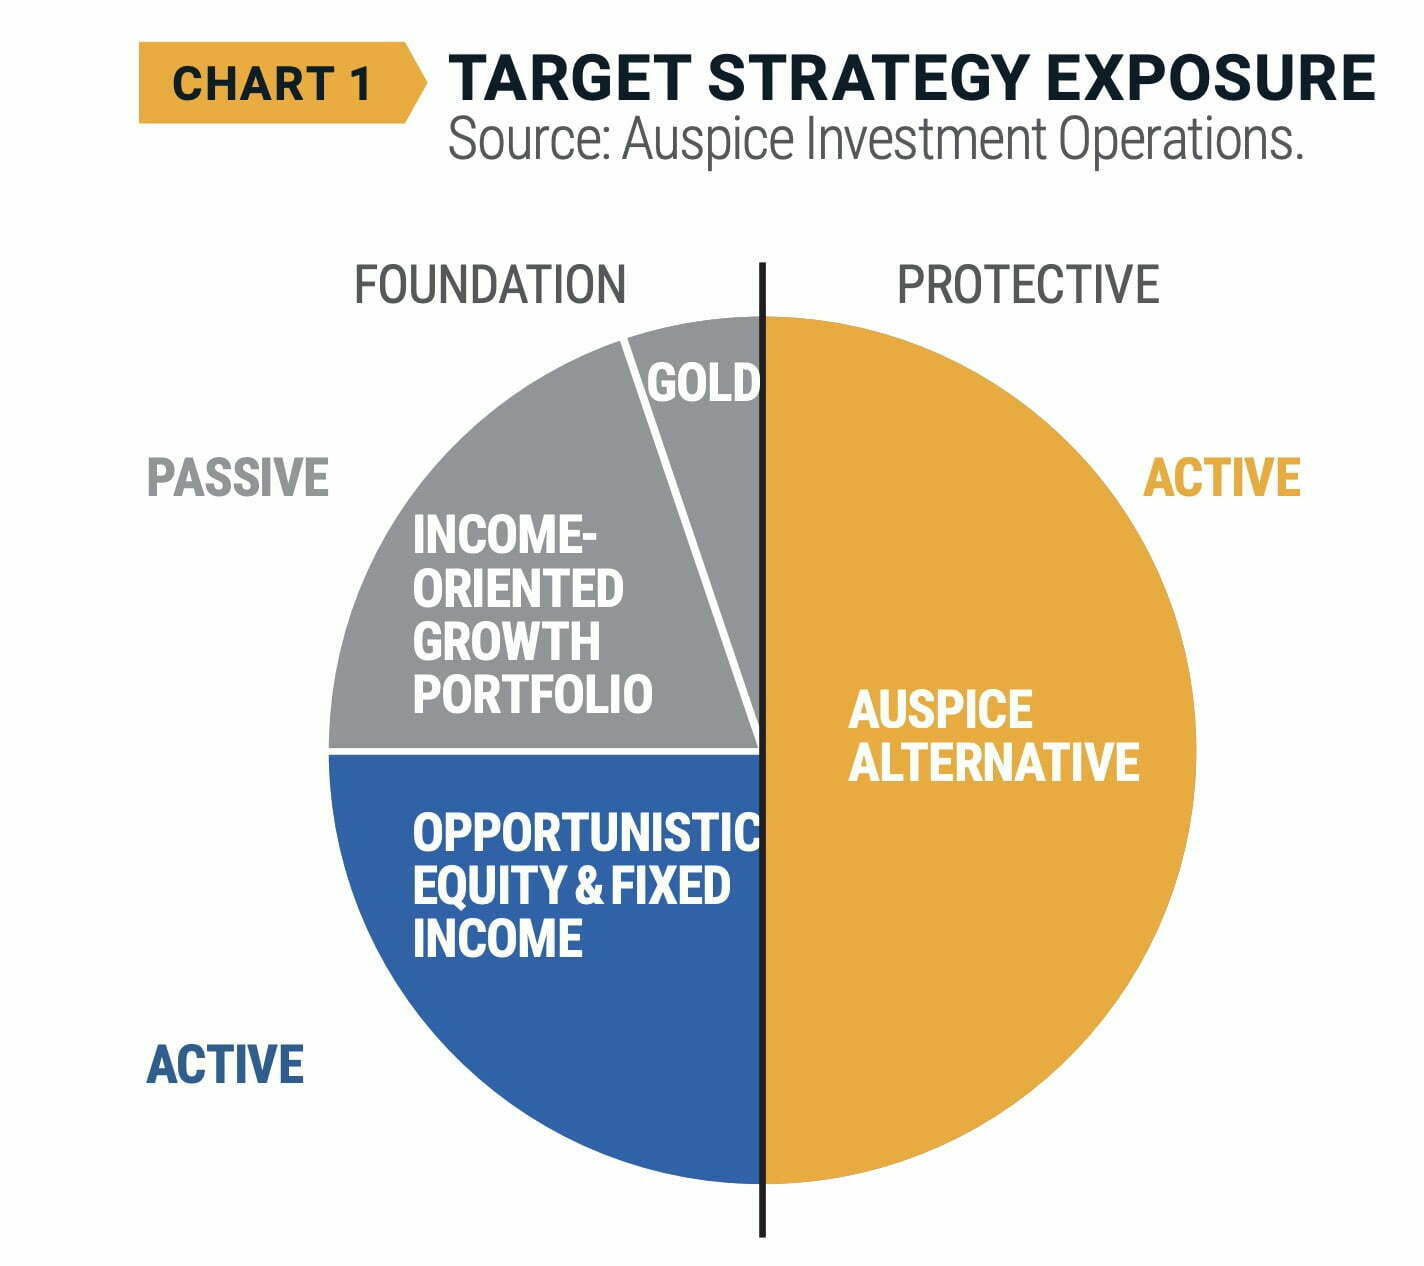 Auspice One Fund Trust Target Strategy Exposure